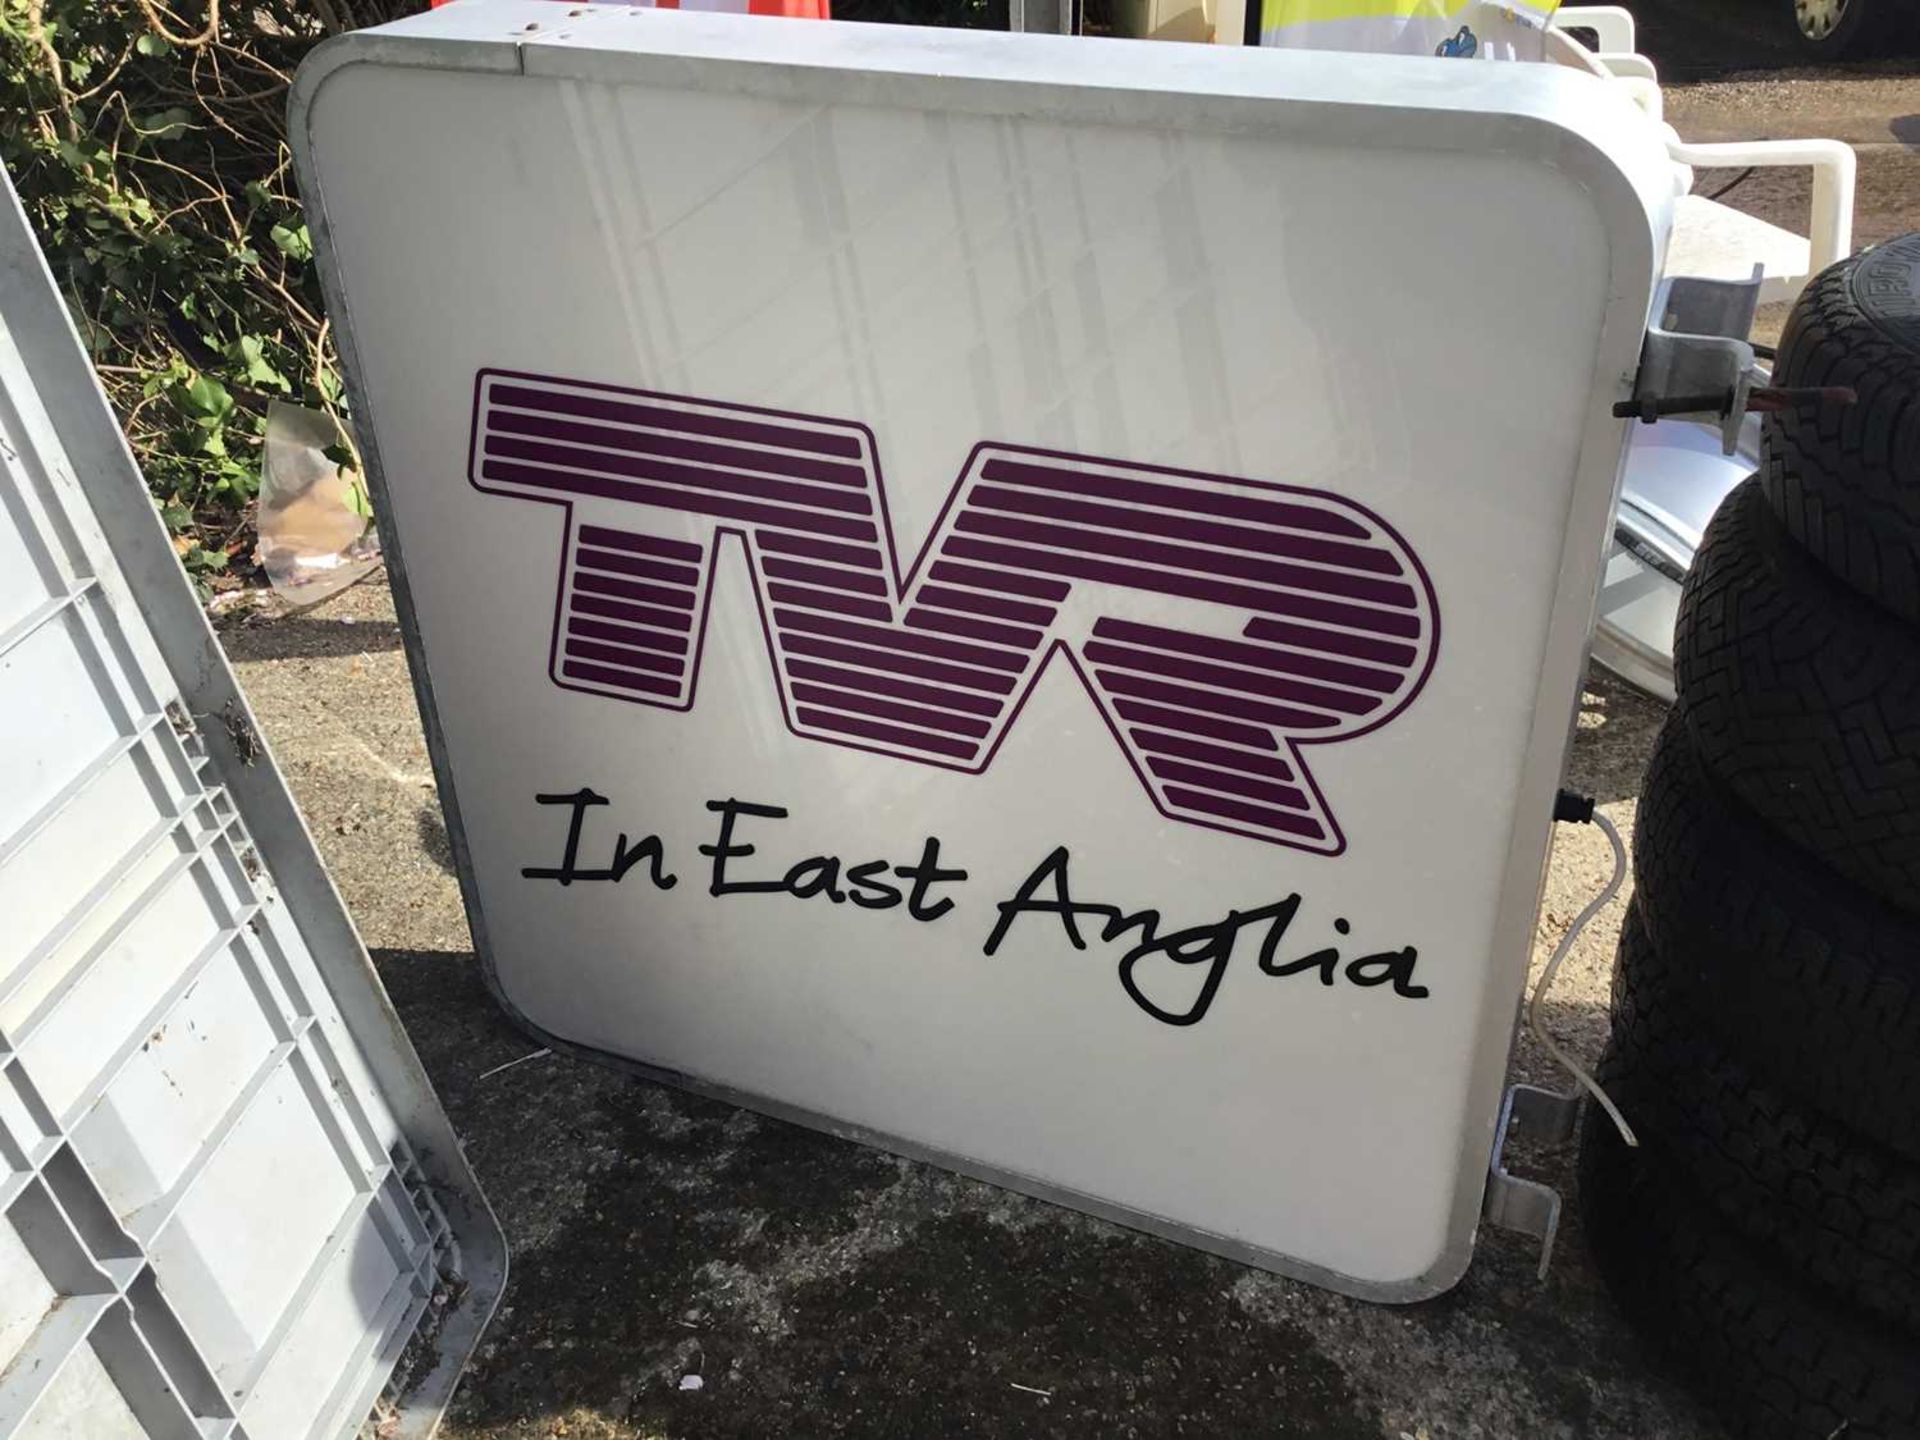 TVR main agent 'In East Anglia' double sided illuminated hanging sign 98 x 98 cm